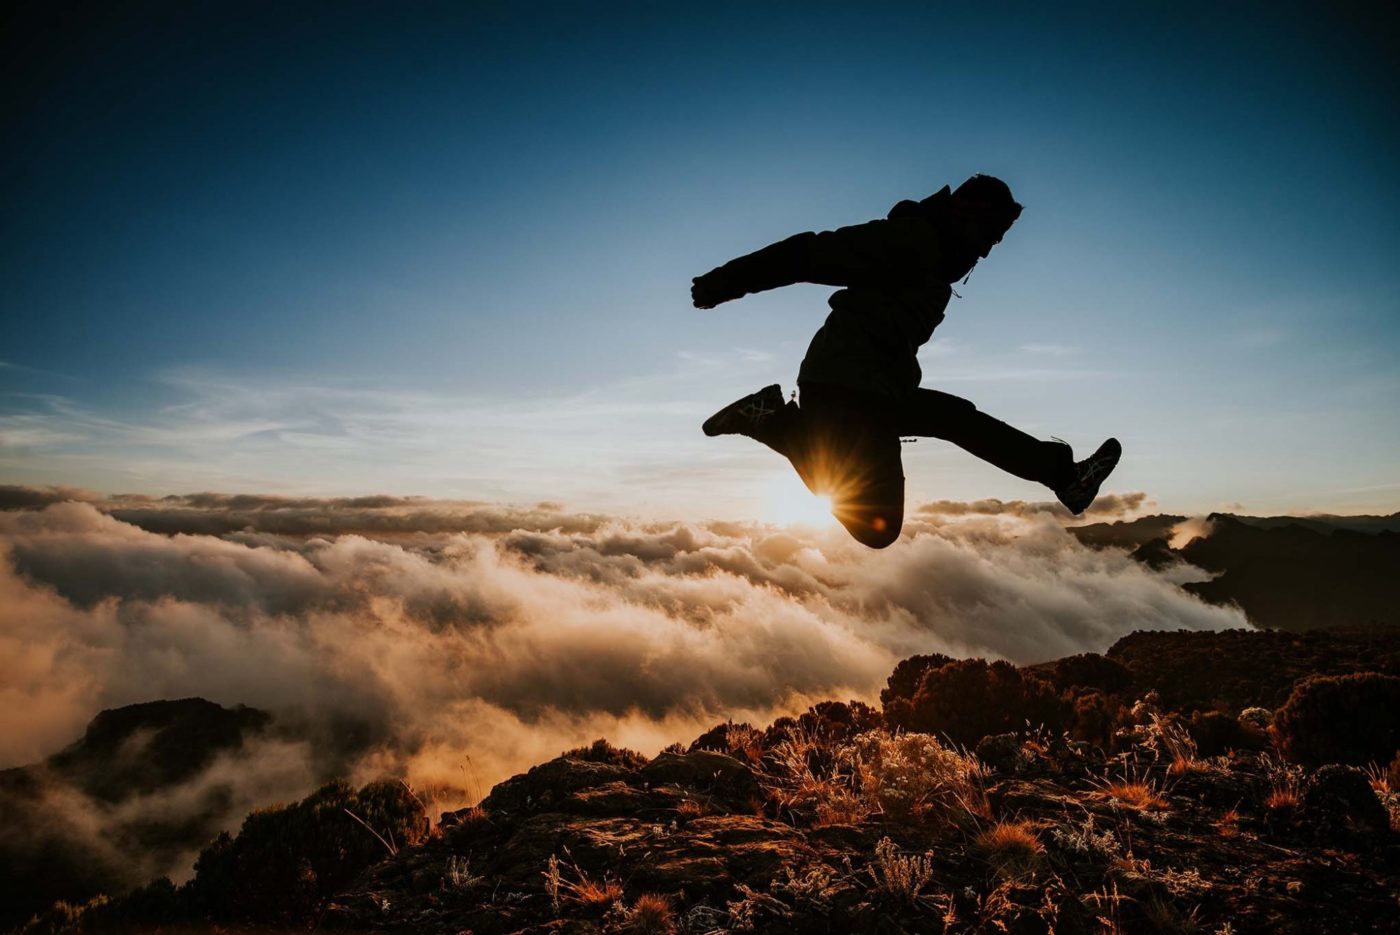 Picture of a man jumping above the clouds on Kilimanjaro